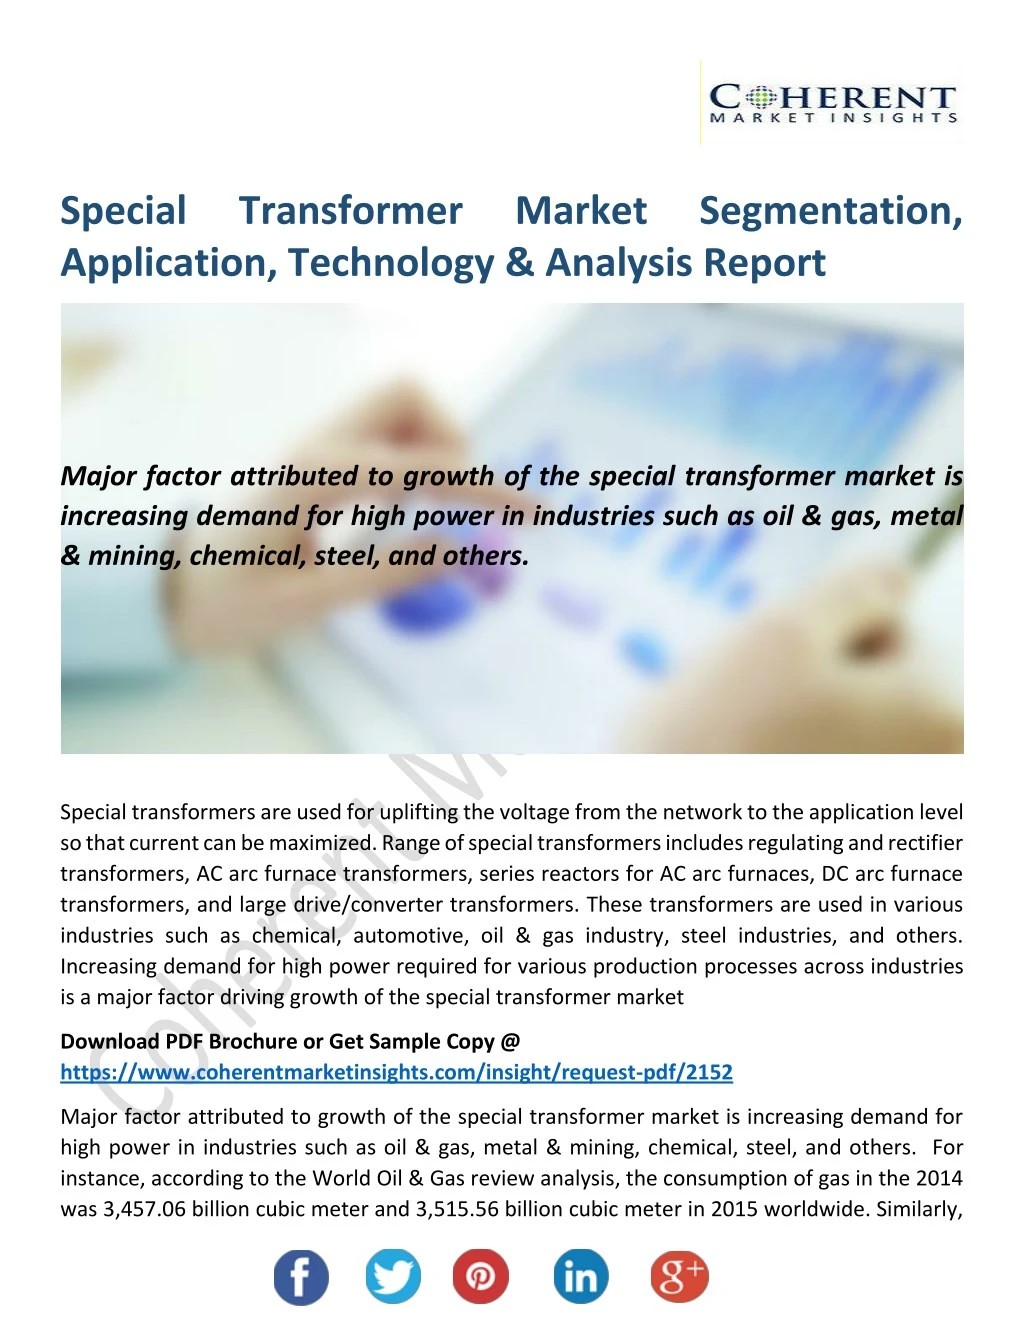 special application technology analysis report